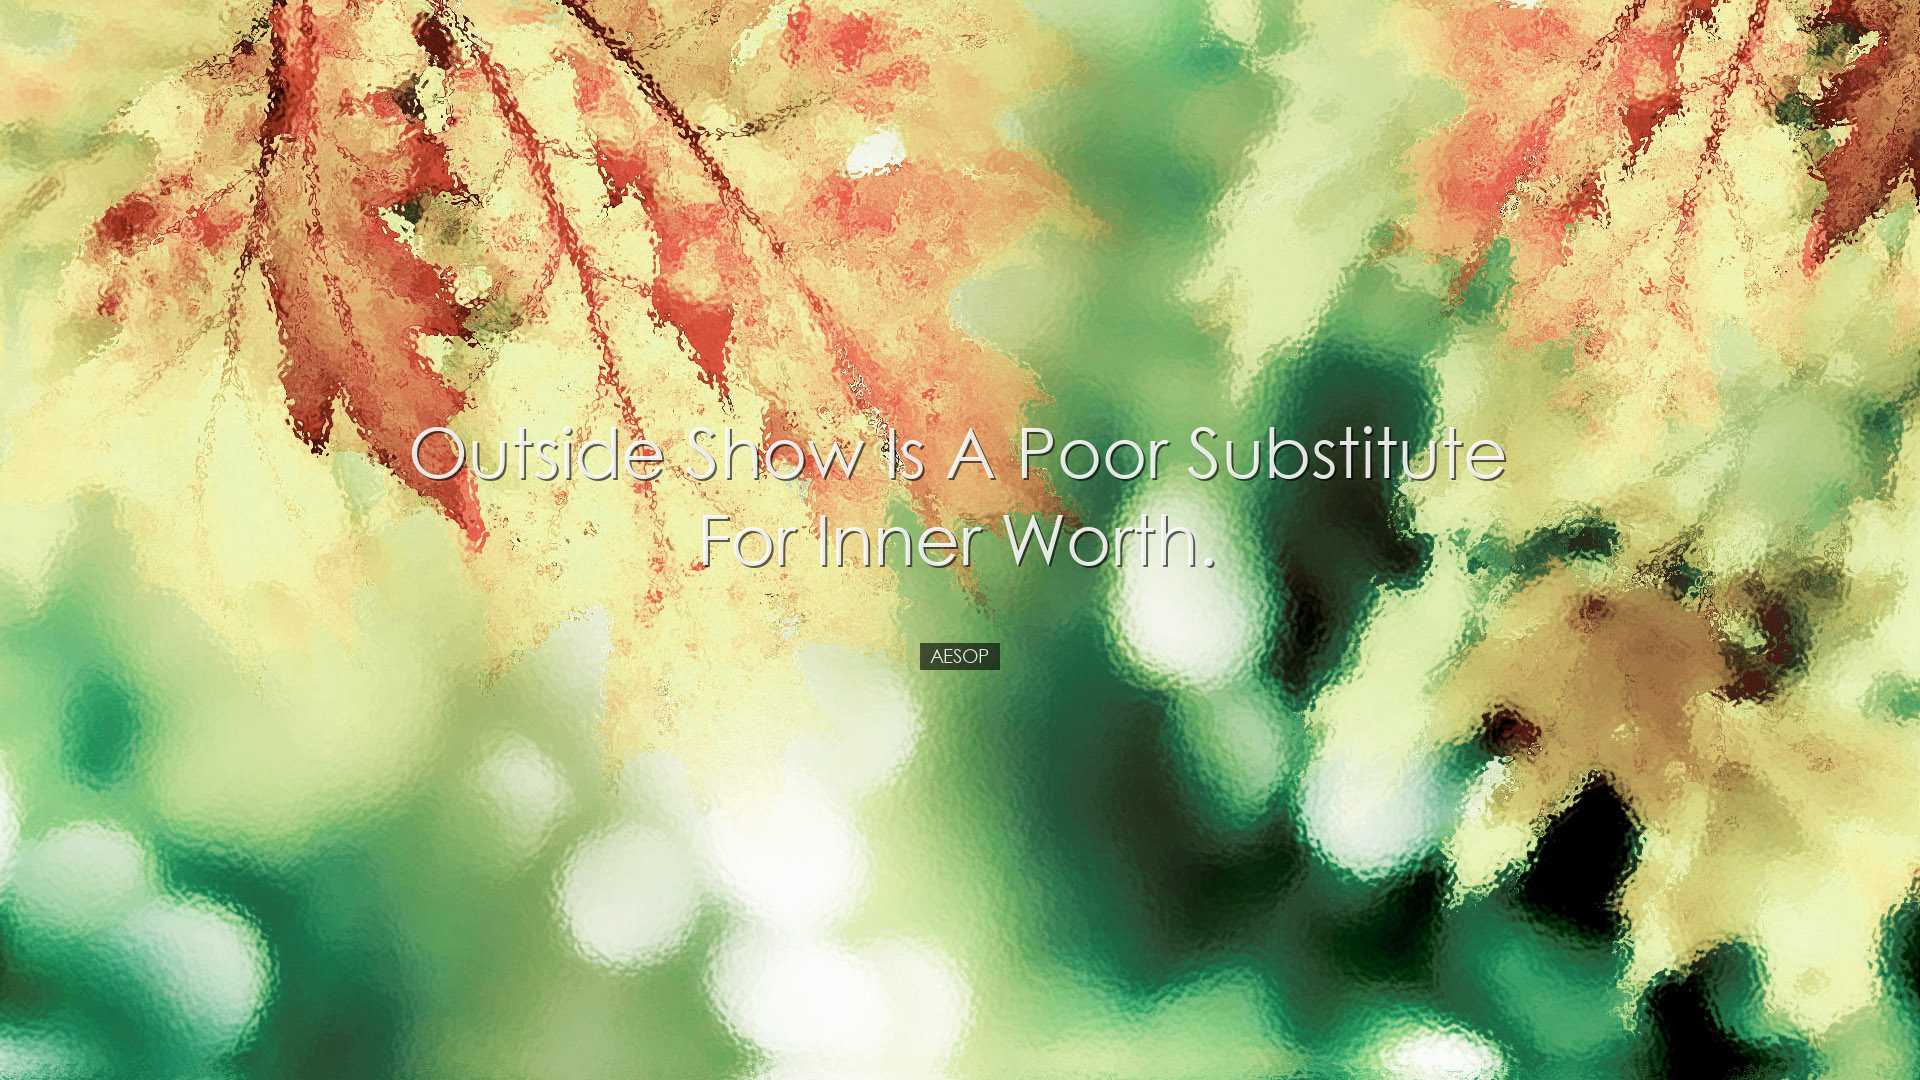 Outside show is a poor substitute for inner worth. - Aesop